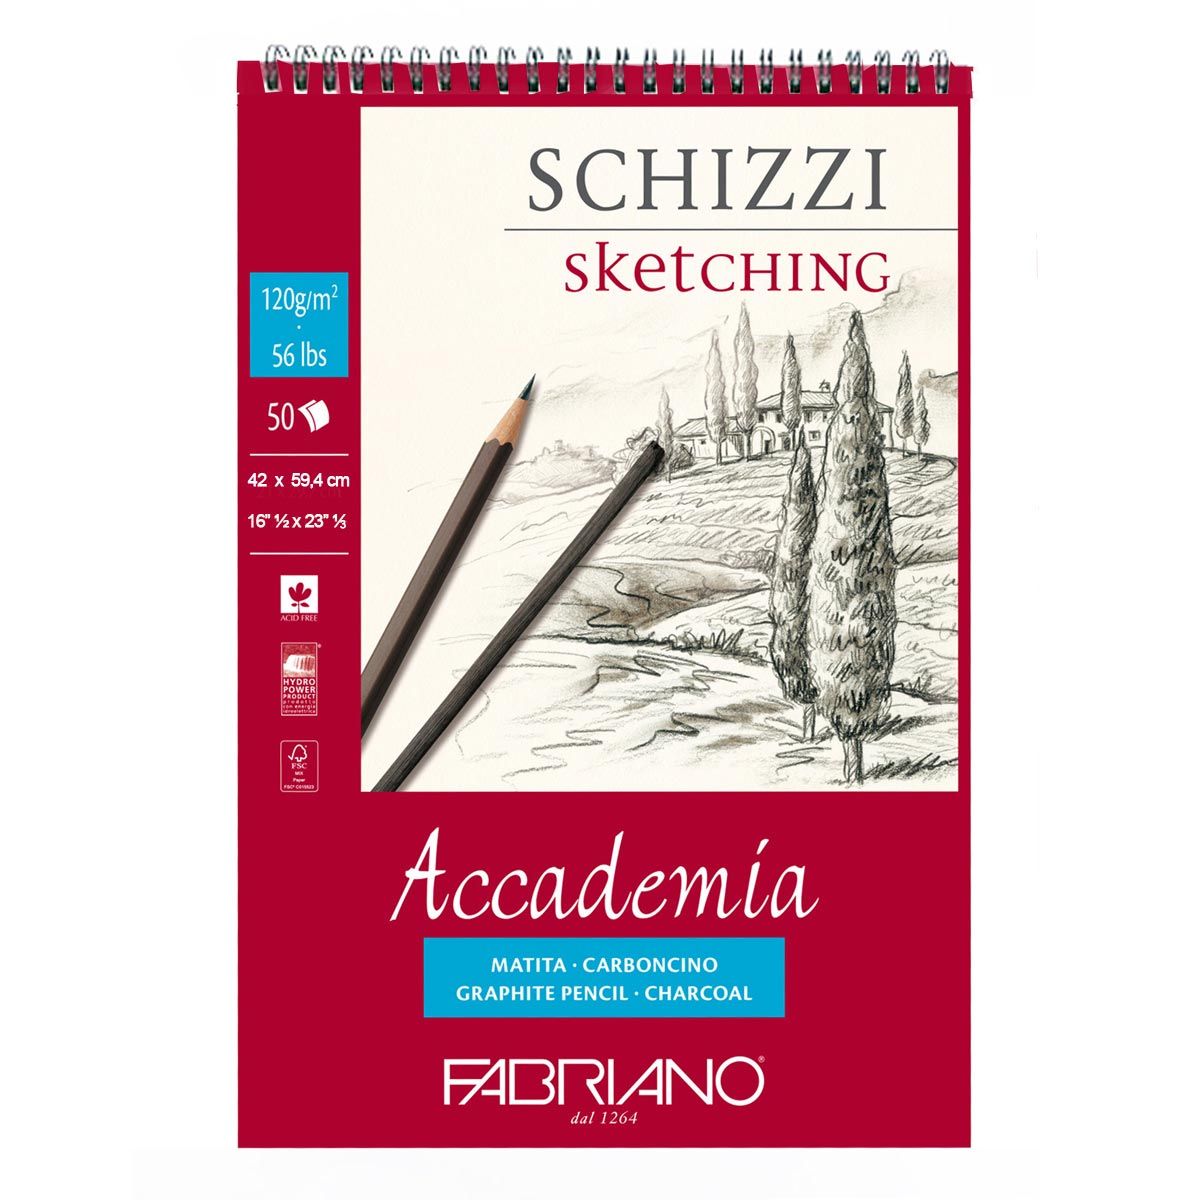 Fabriano Accademia Sketching Pad 16-1/2" x 23-1/3"